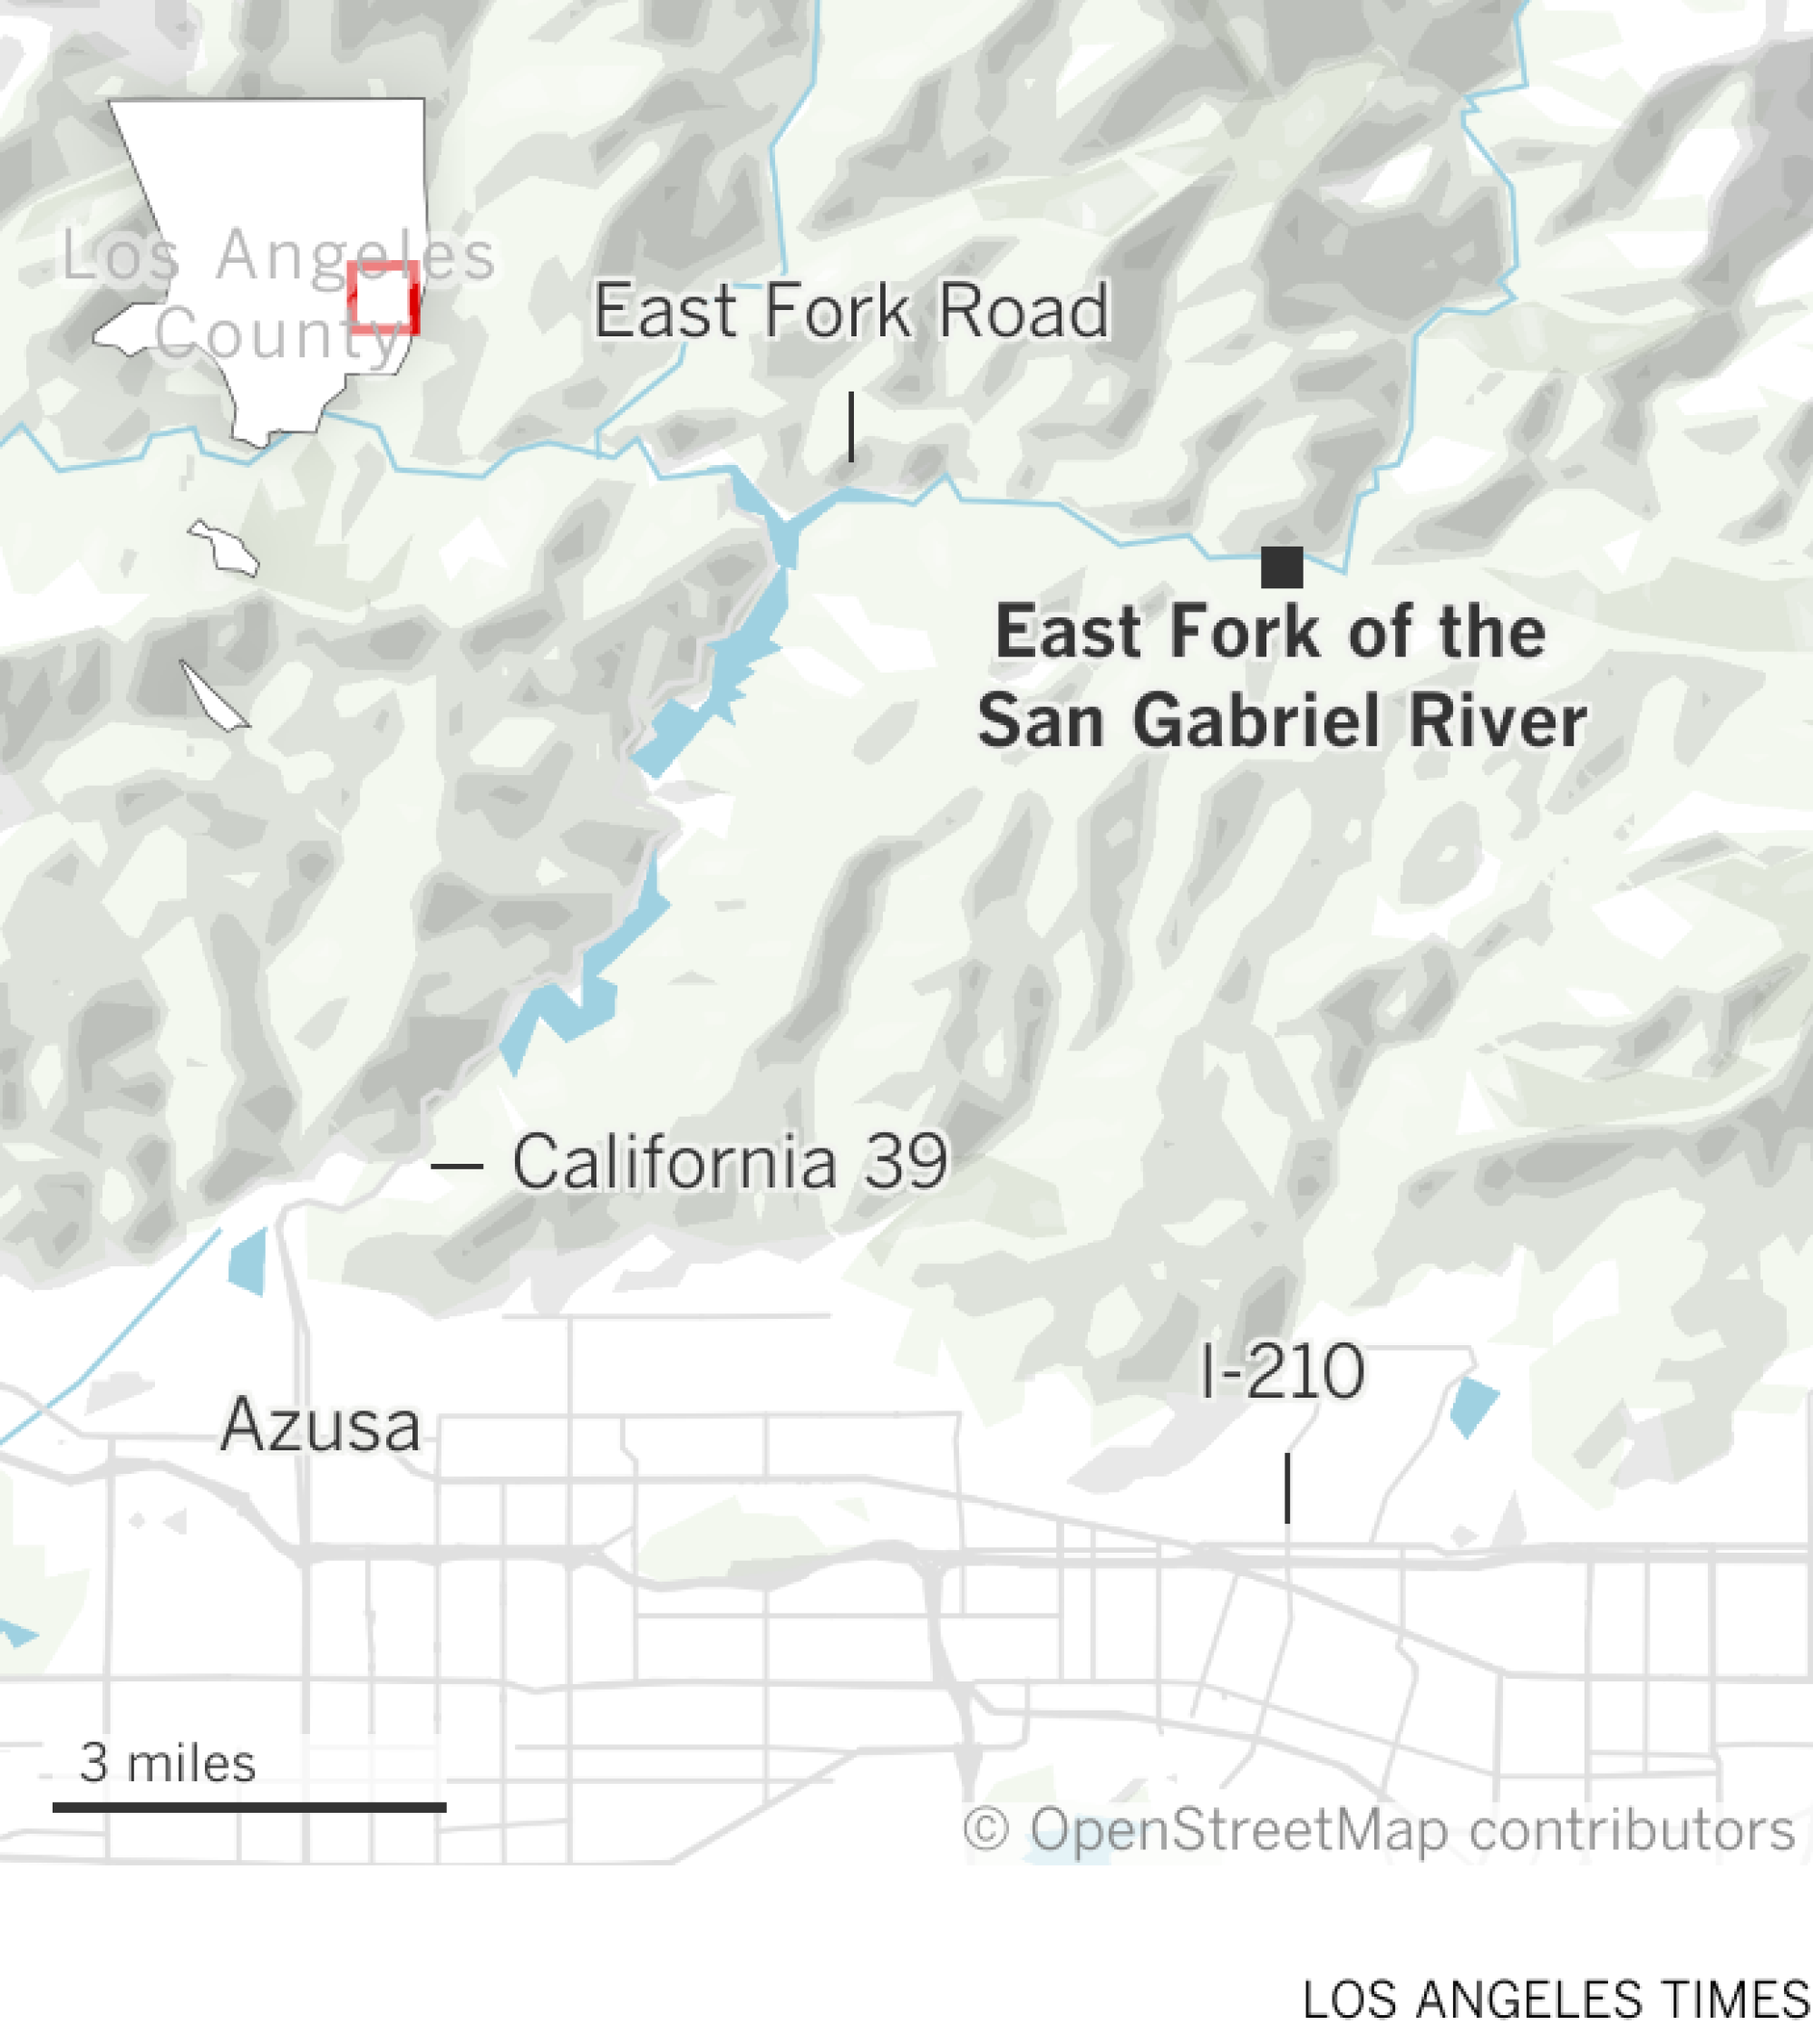 Map shows the East Fork of the San Gabriel River north of Glendora, Claremont and the I-210.